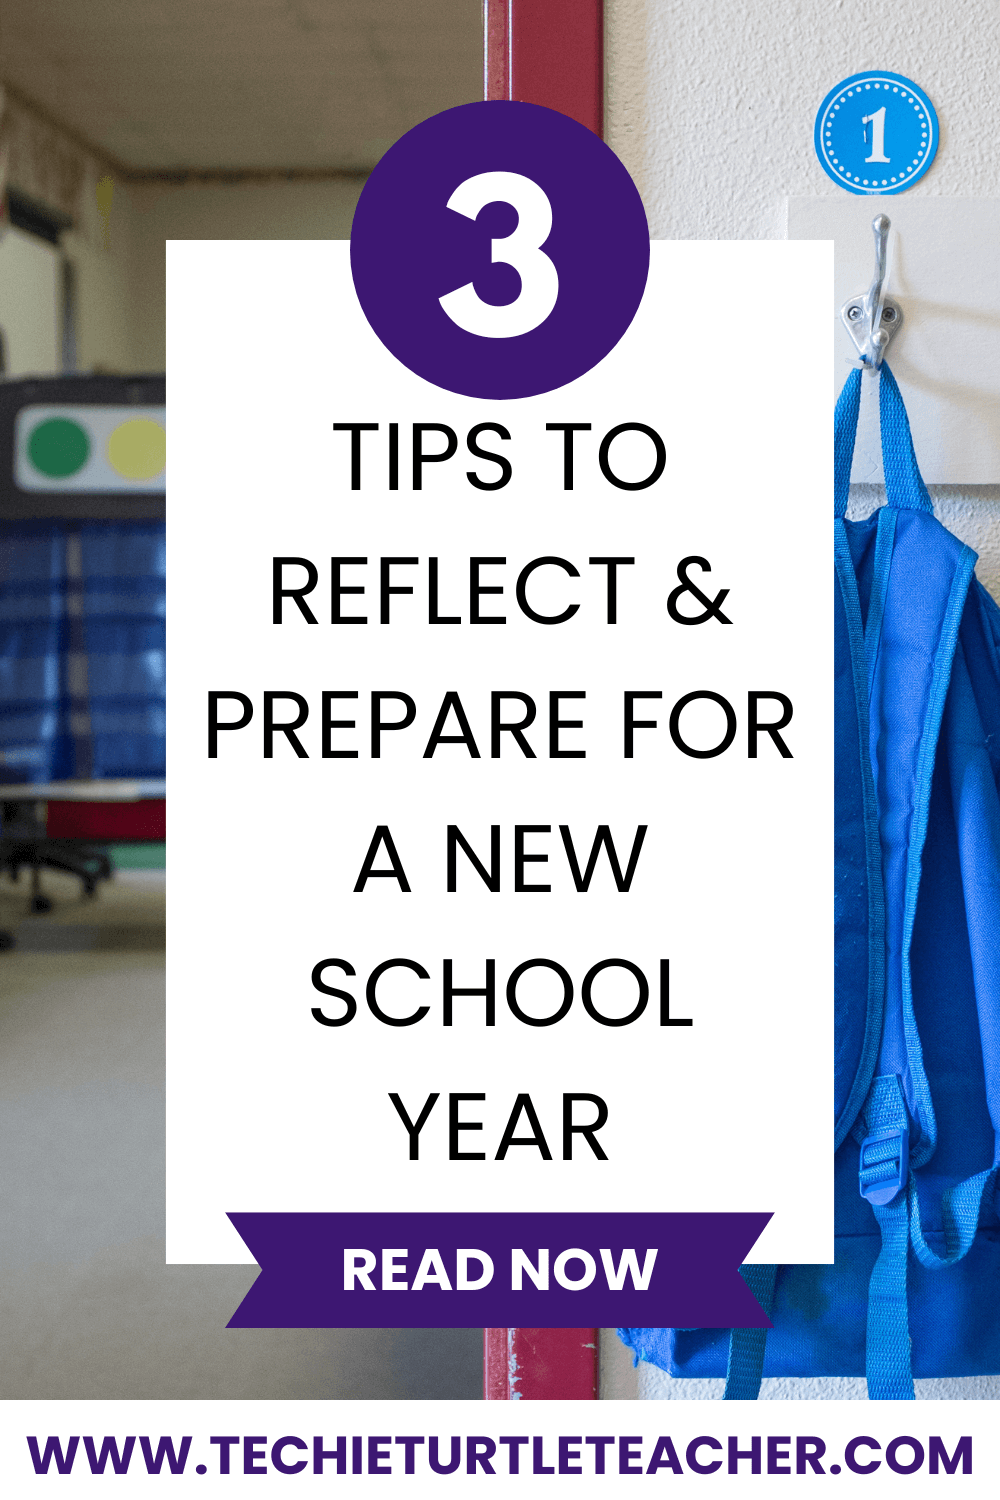 3 tips to reflect & prepare for a new school year